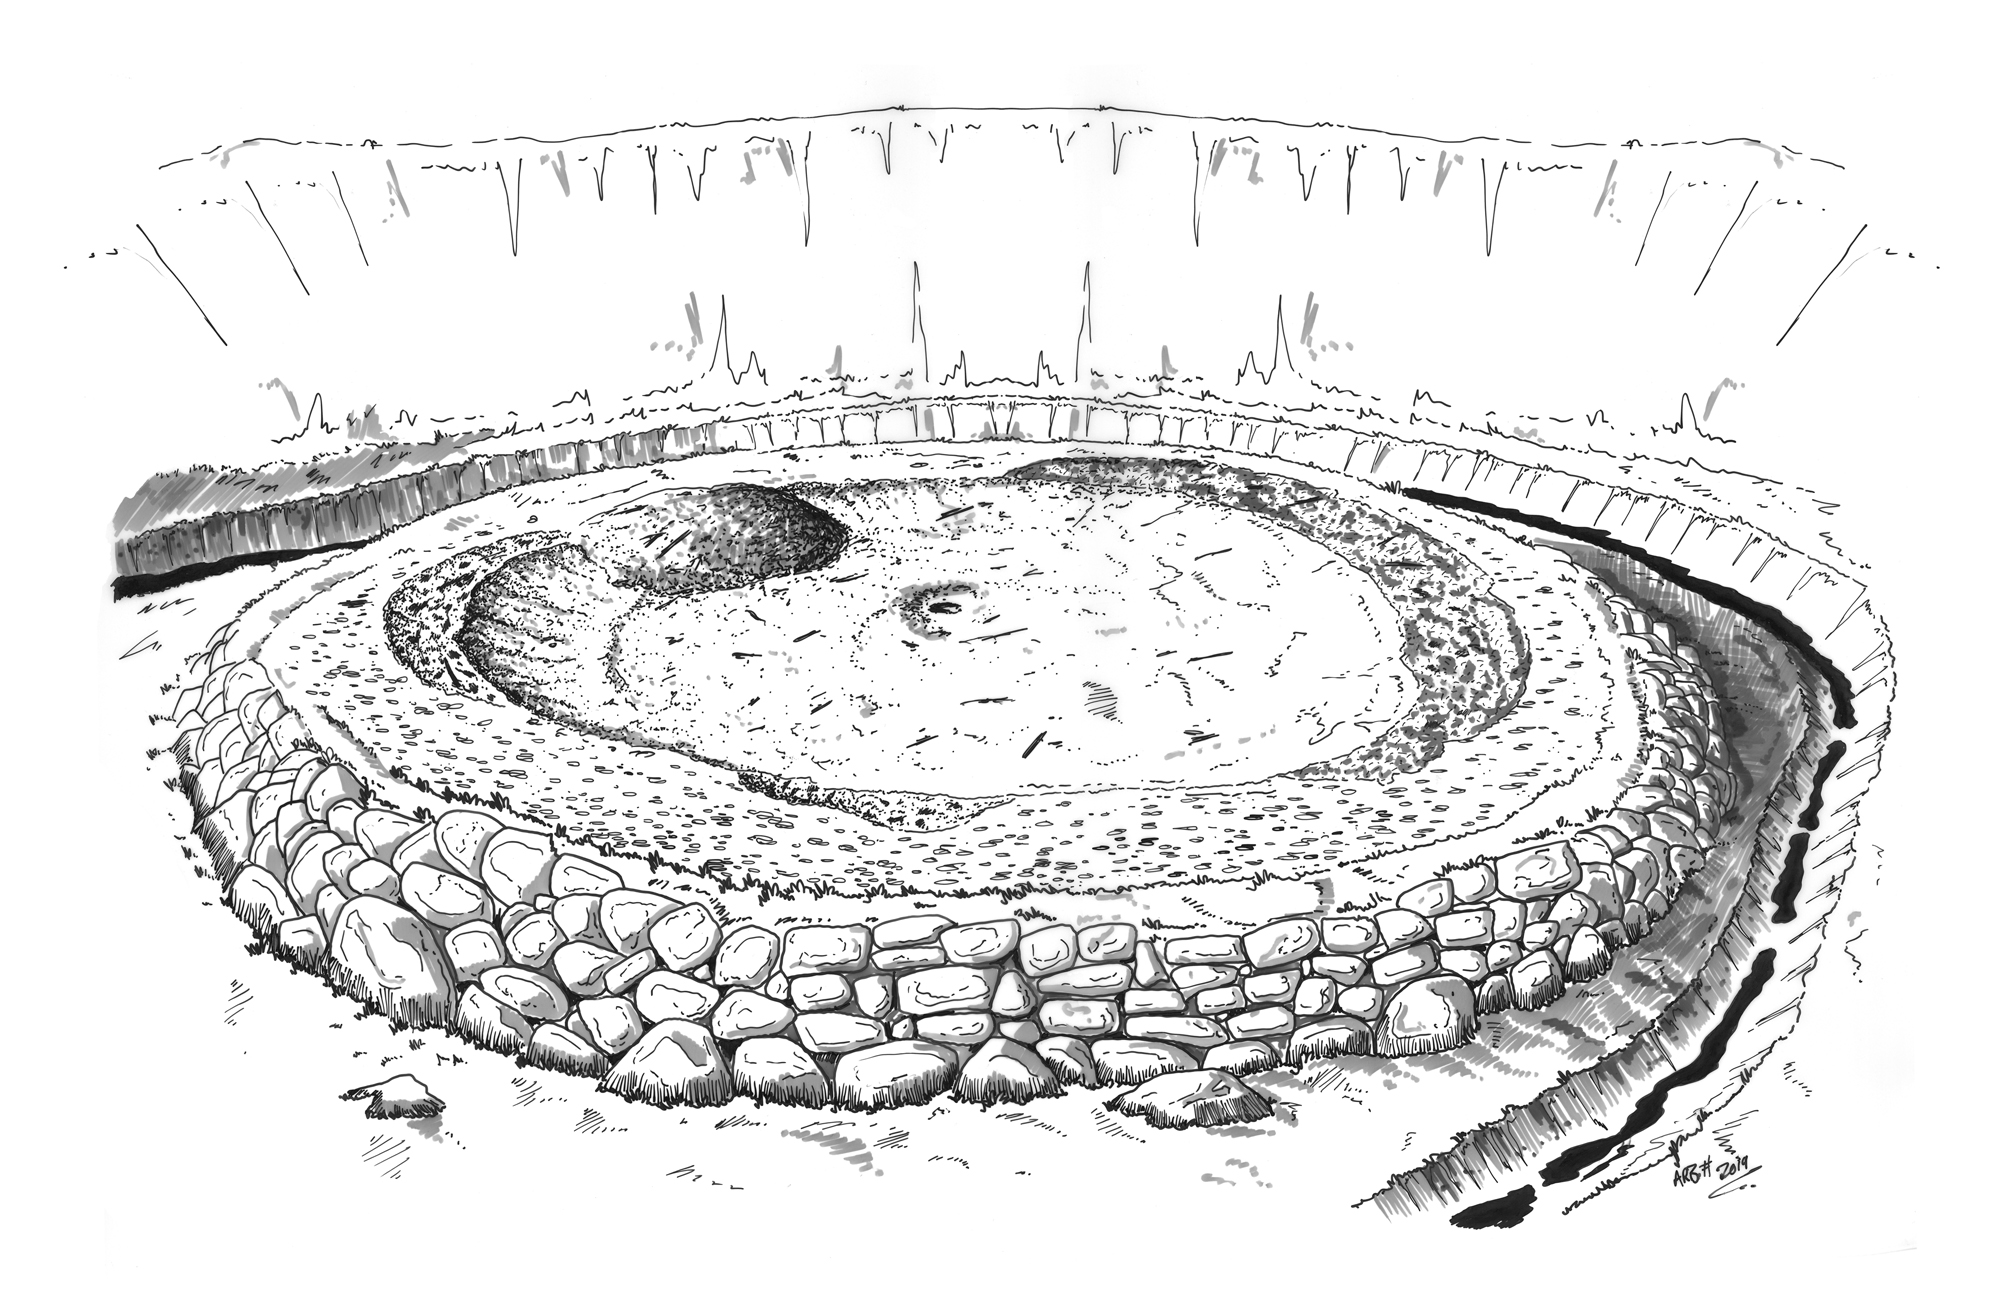 Black and white drawn illustration of early charcoal burning site in forest